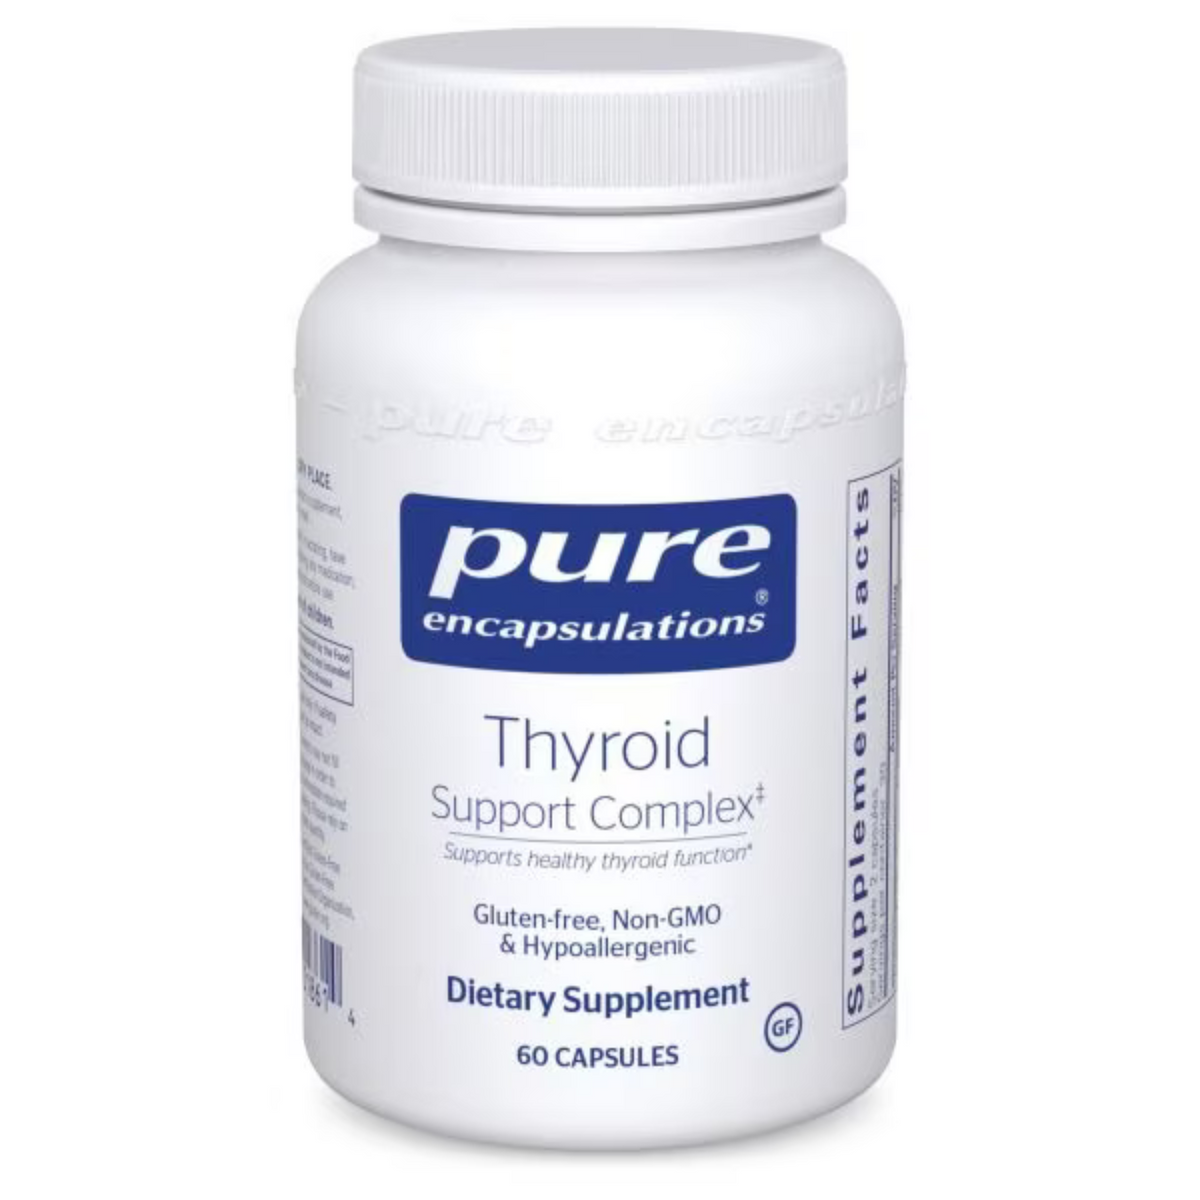 Primary Image of Thyroid Support Complex Capsules (60 count)